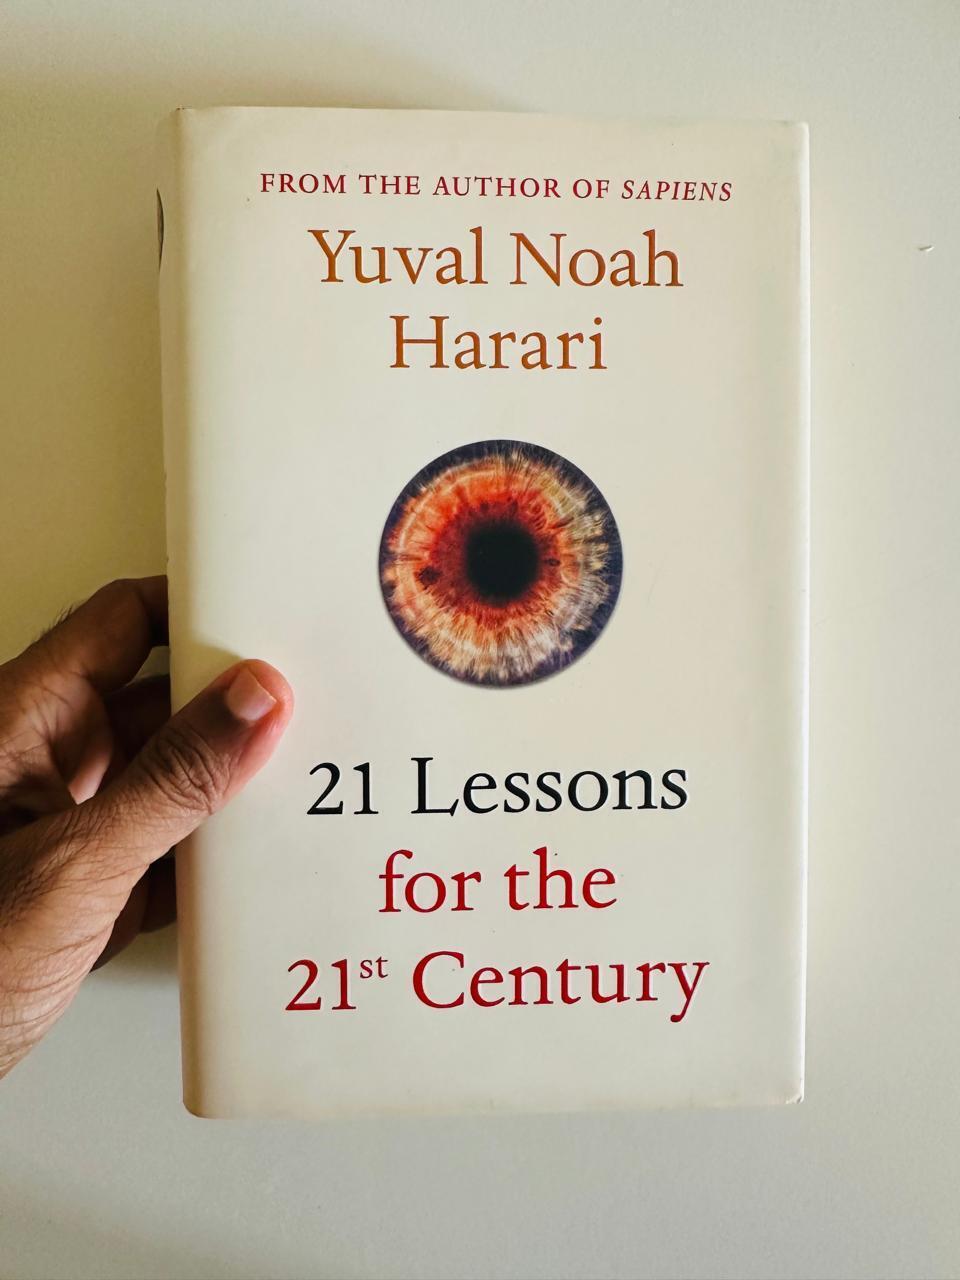 21 lessons for the 21st century By Yuval Noah Harari